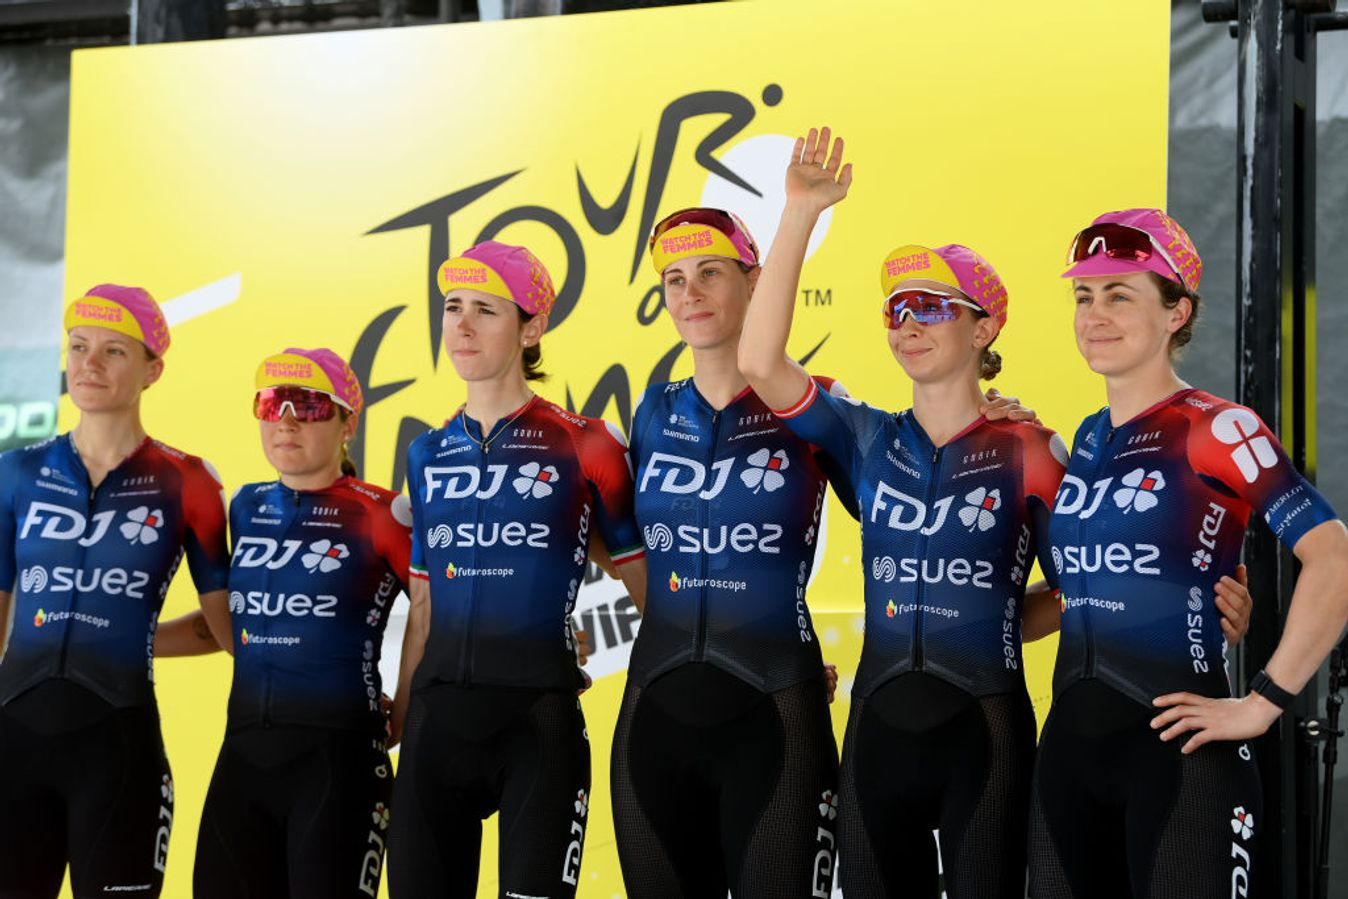 FDJ-SUEZ have some key riders up for renewal